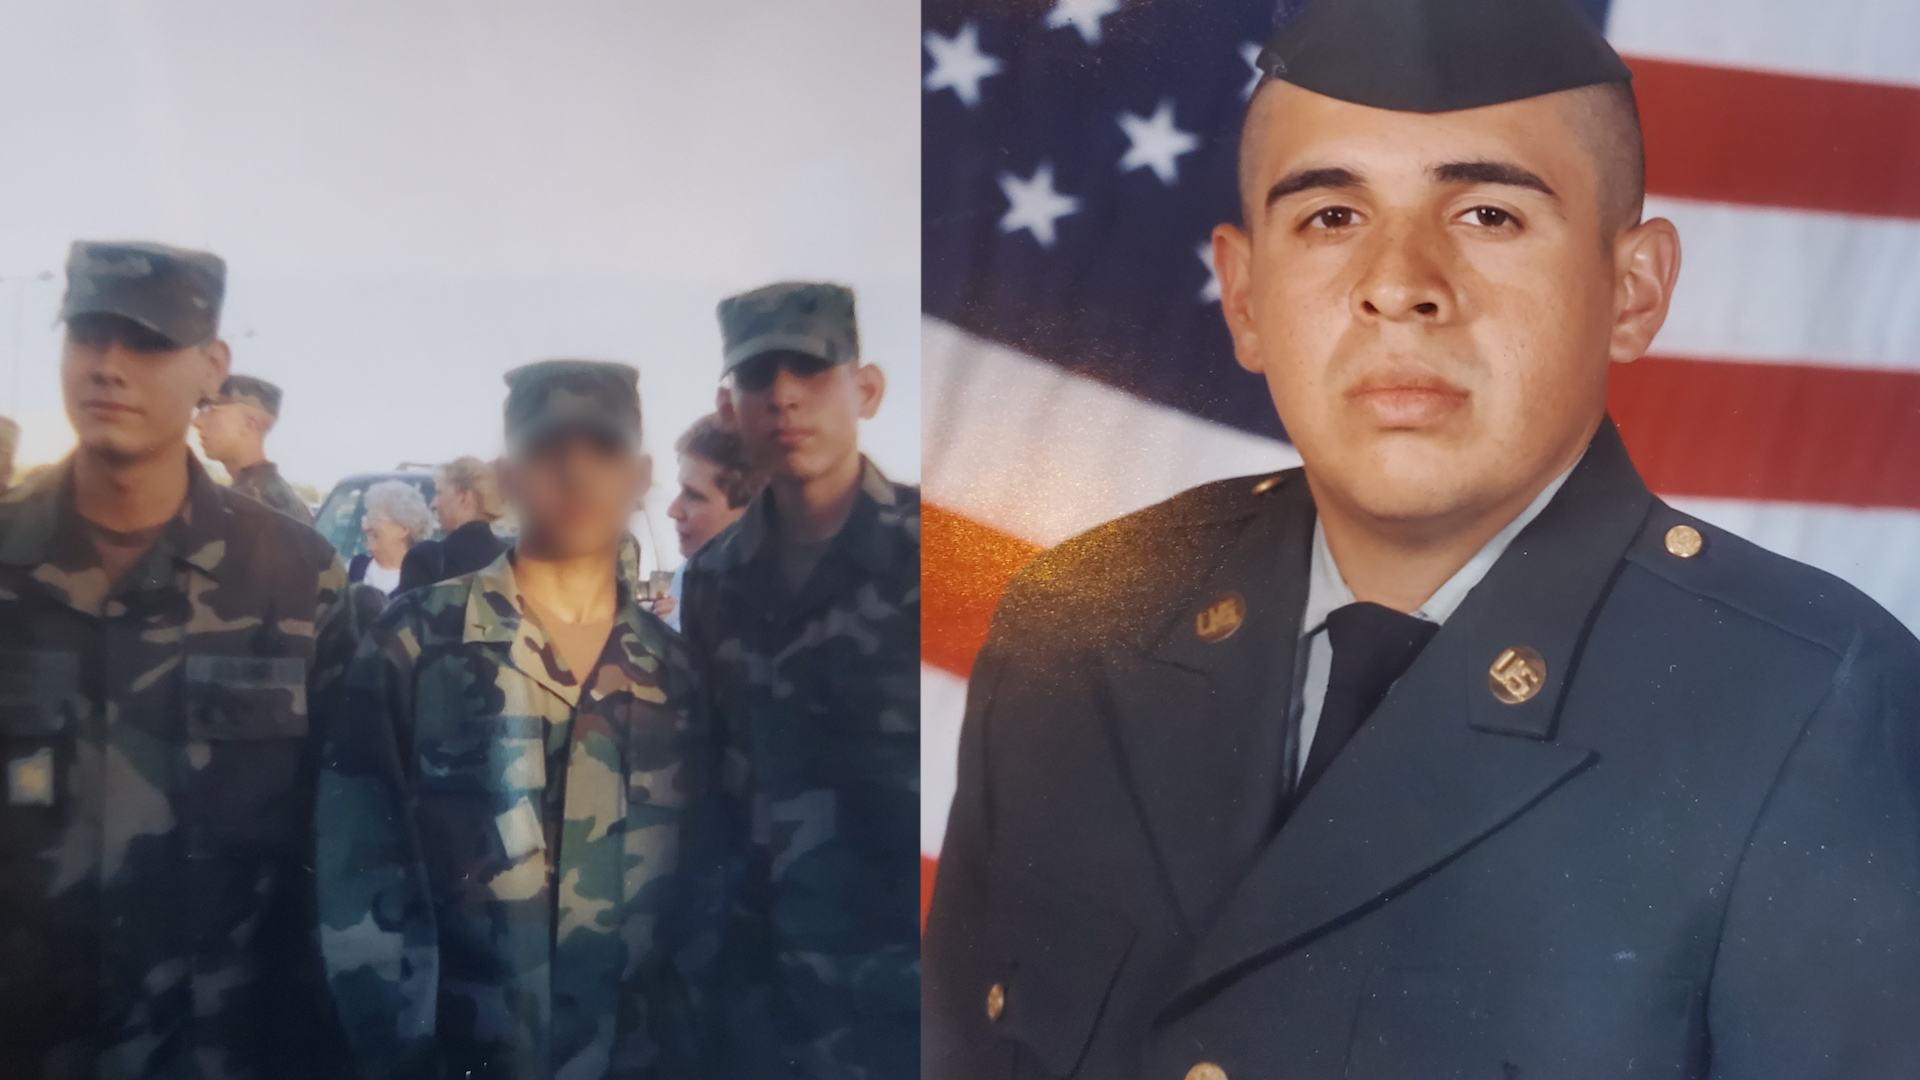 Pictures of Joel & Fernando, who both served in the Army